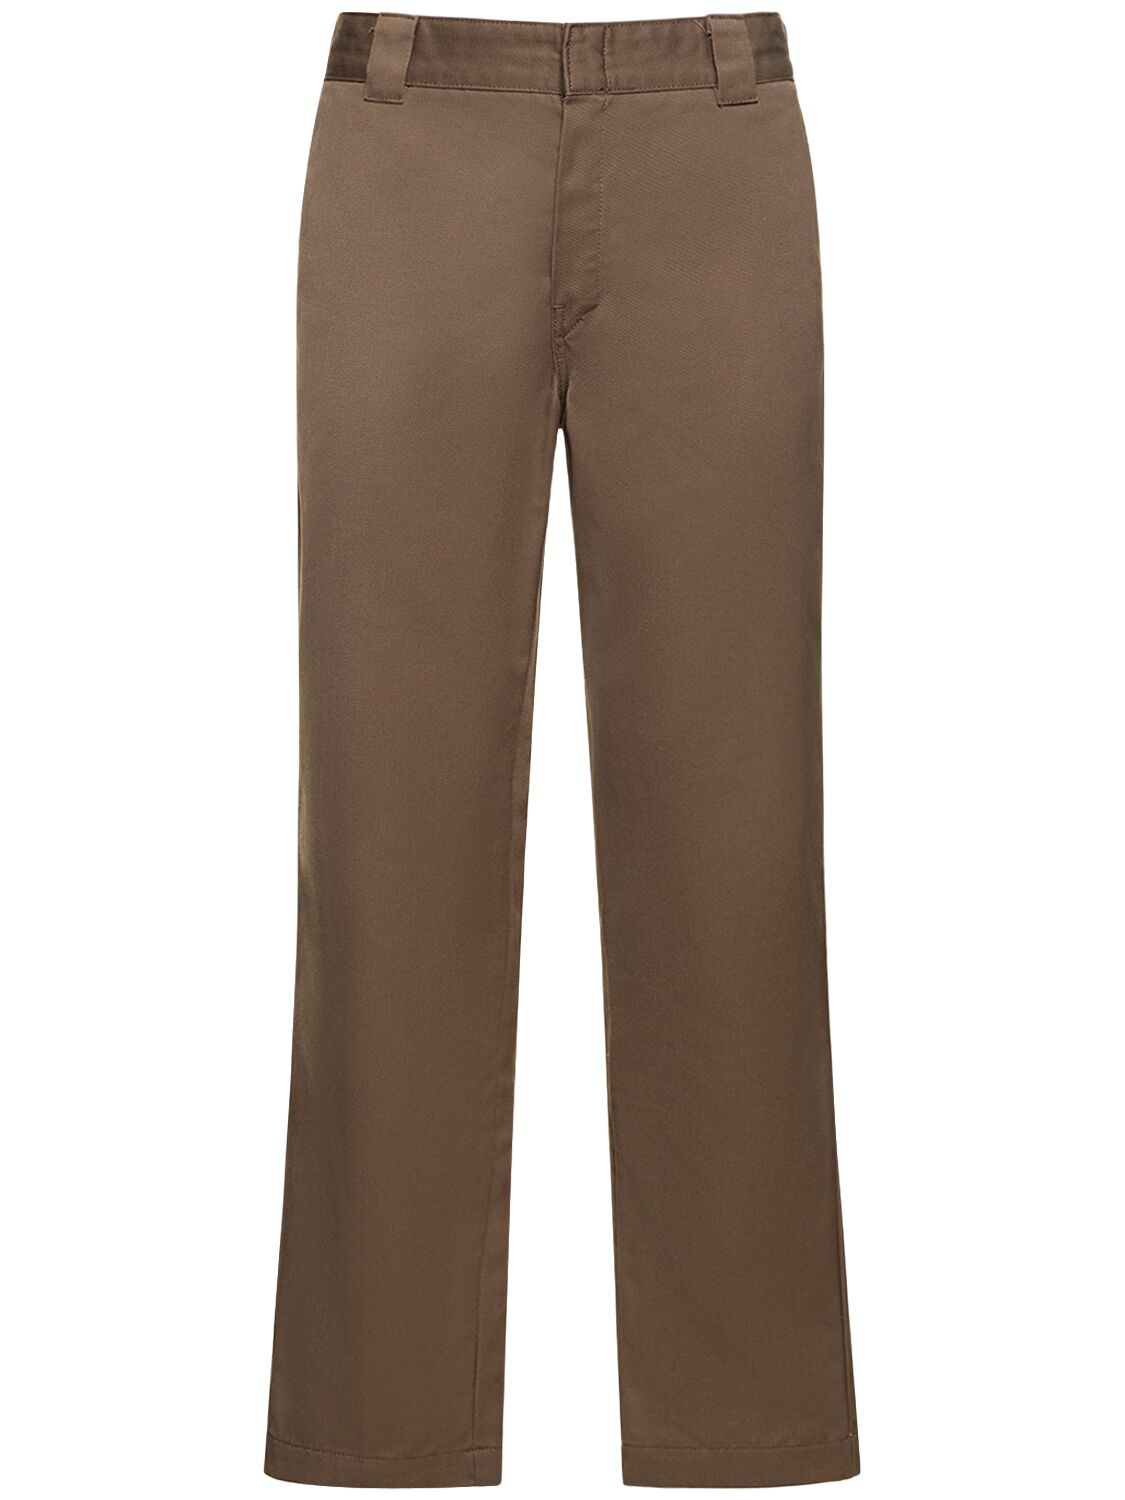 Image of Master Rinsed Cotton Blend Pants